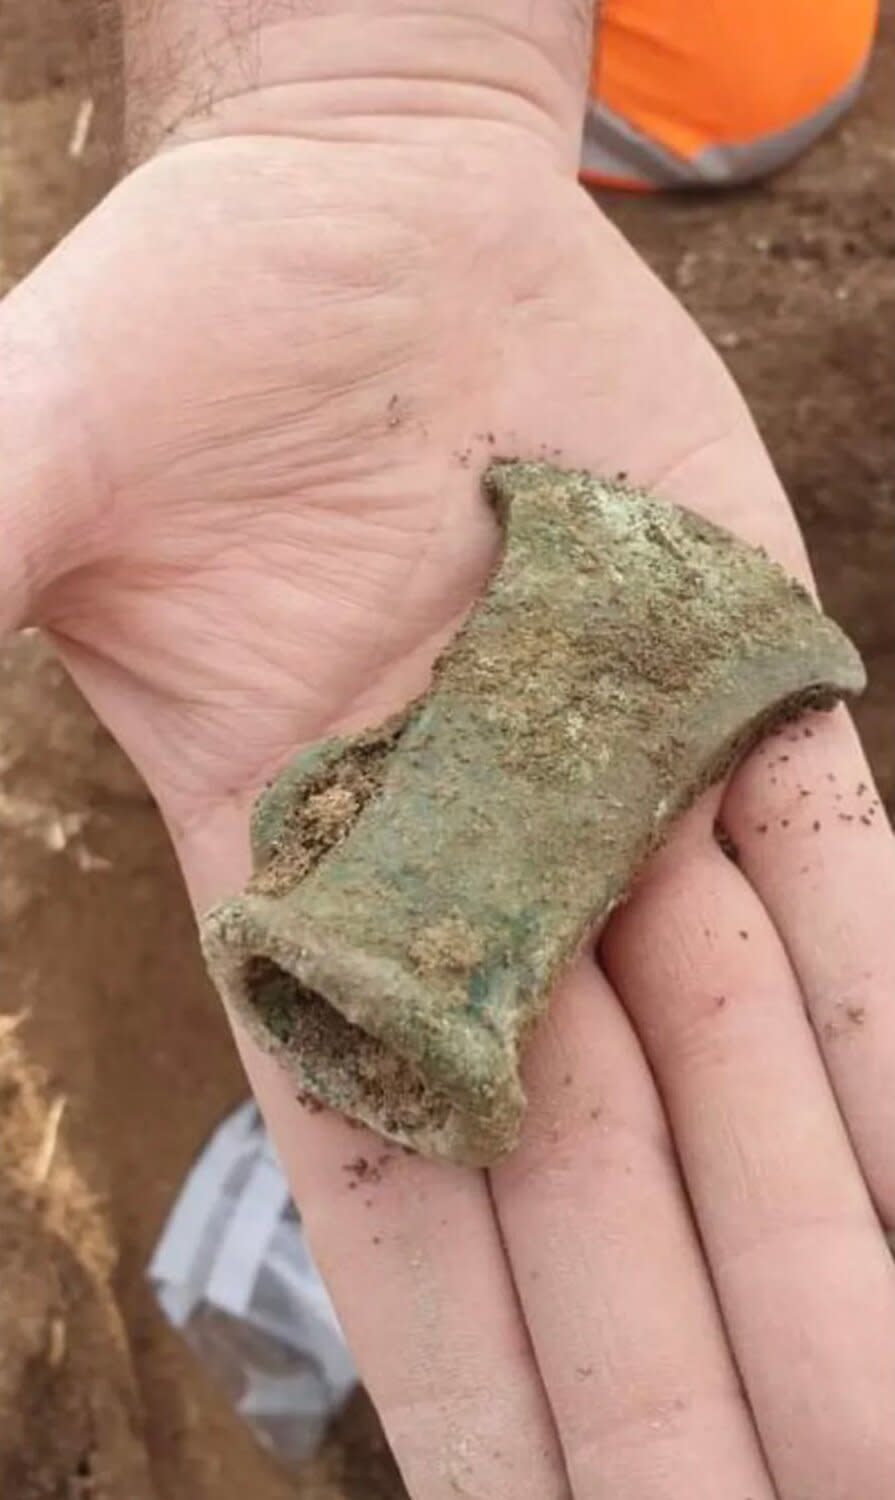 Teenager Discovers 3,000-Year-Old Ax from the Bronze Age